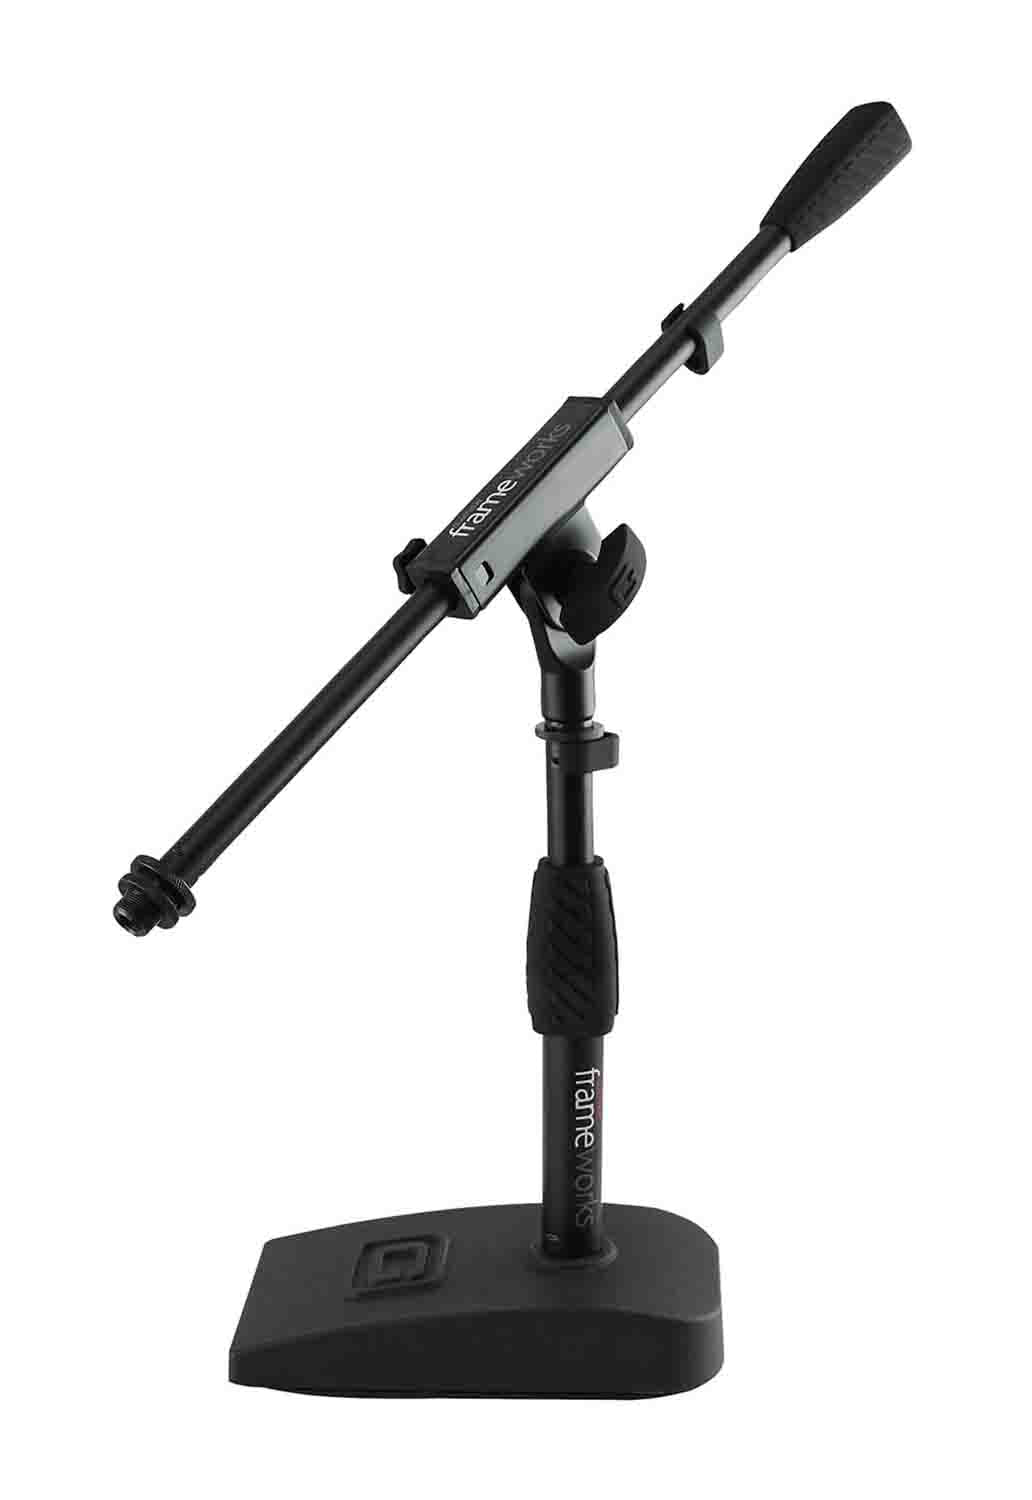 B-Stock: Gator Frameworks GFW-MIC-0821 Compact Base Bass Drum and Amp Mic Stand by Gator Cases